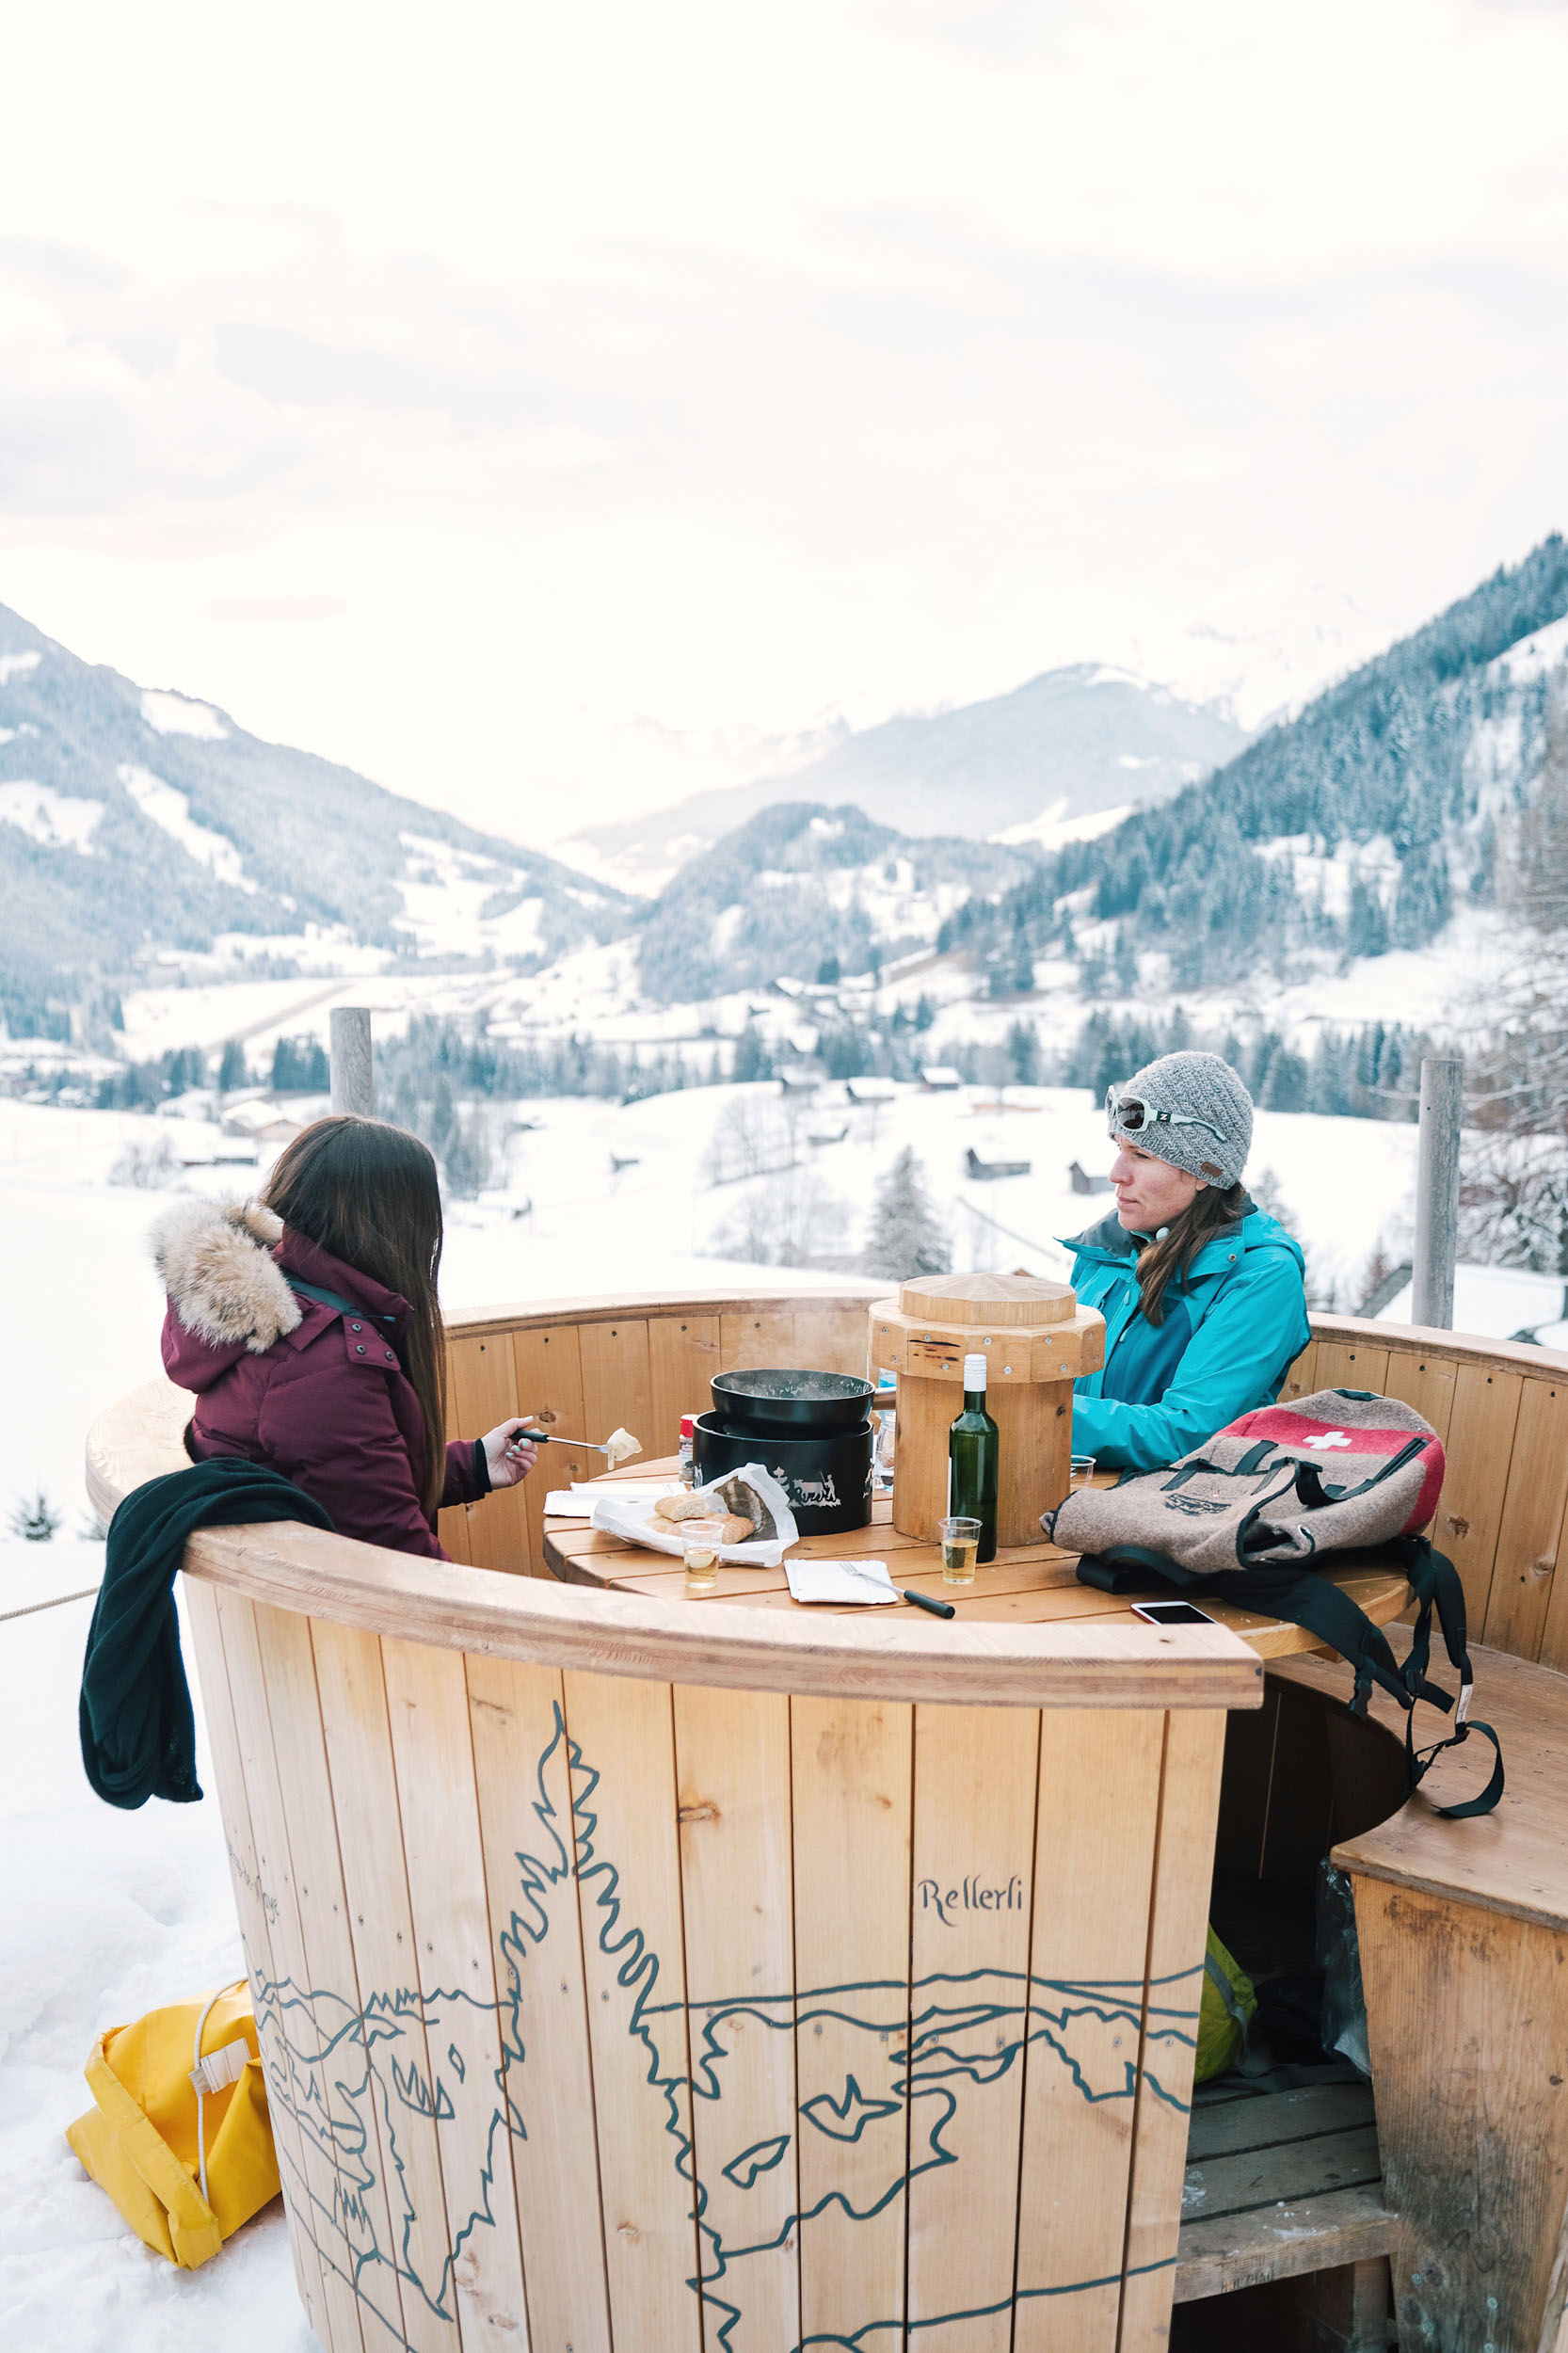 Gstaad is home to three large fondue pots, each with room for up to eight people, and one specially designed hut which also fits up to 8.